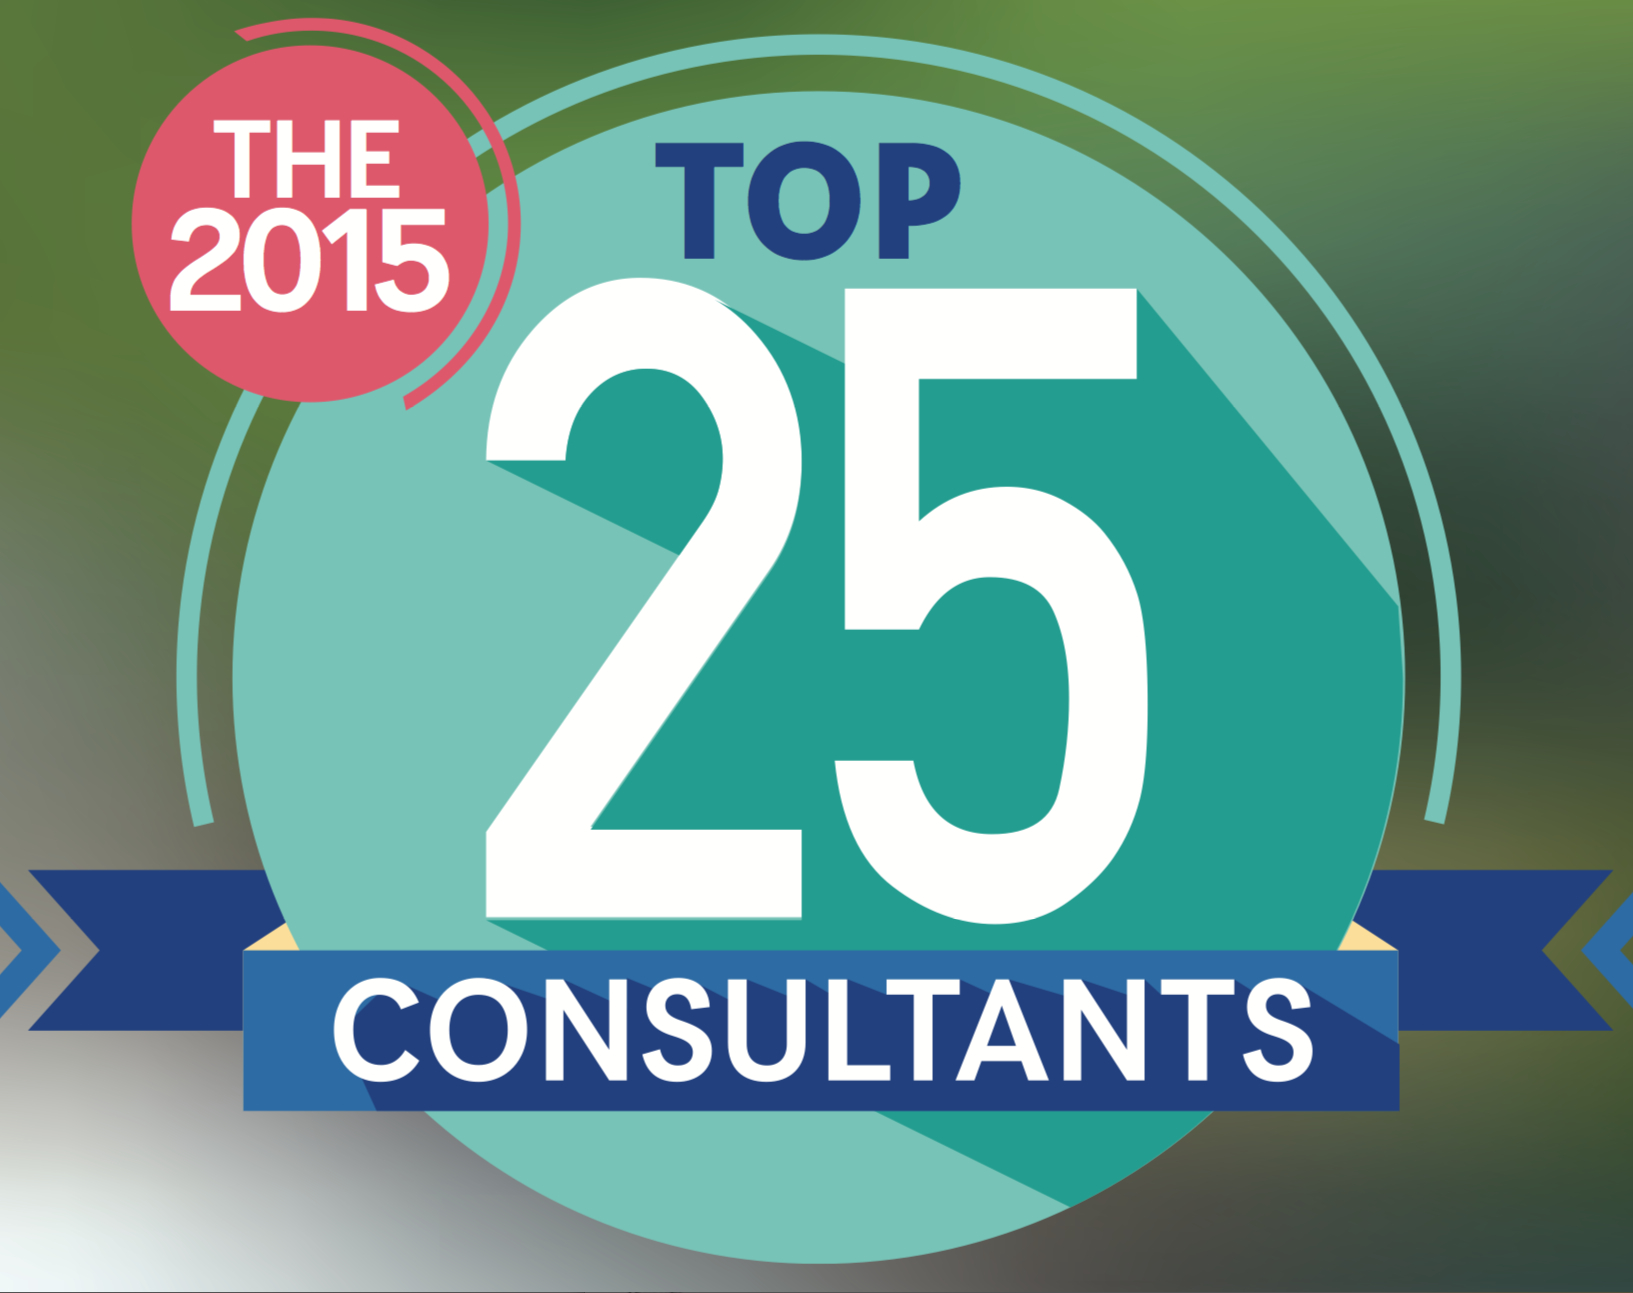 The Top 25 Consultants 2015